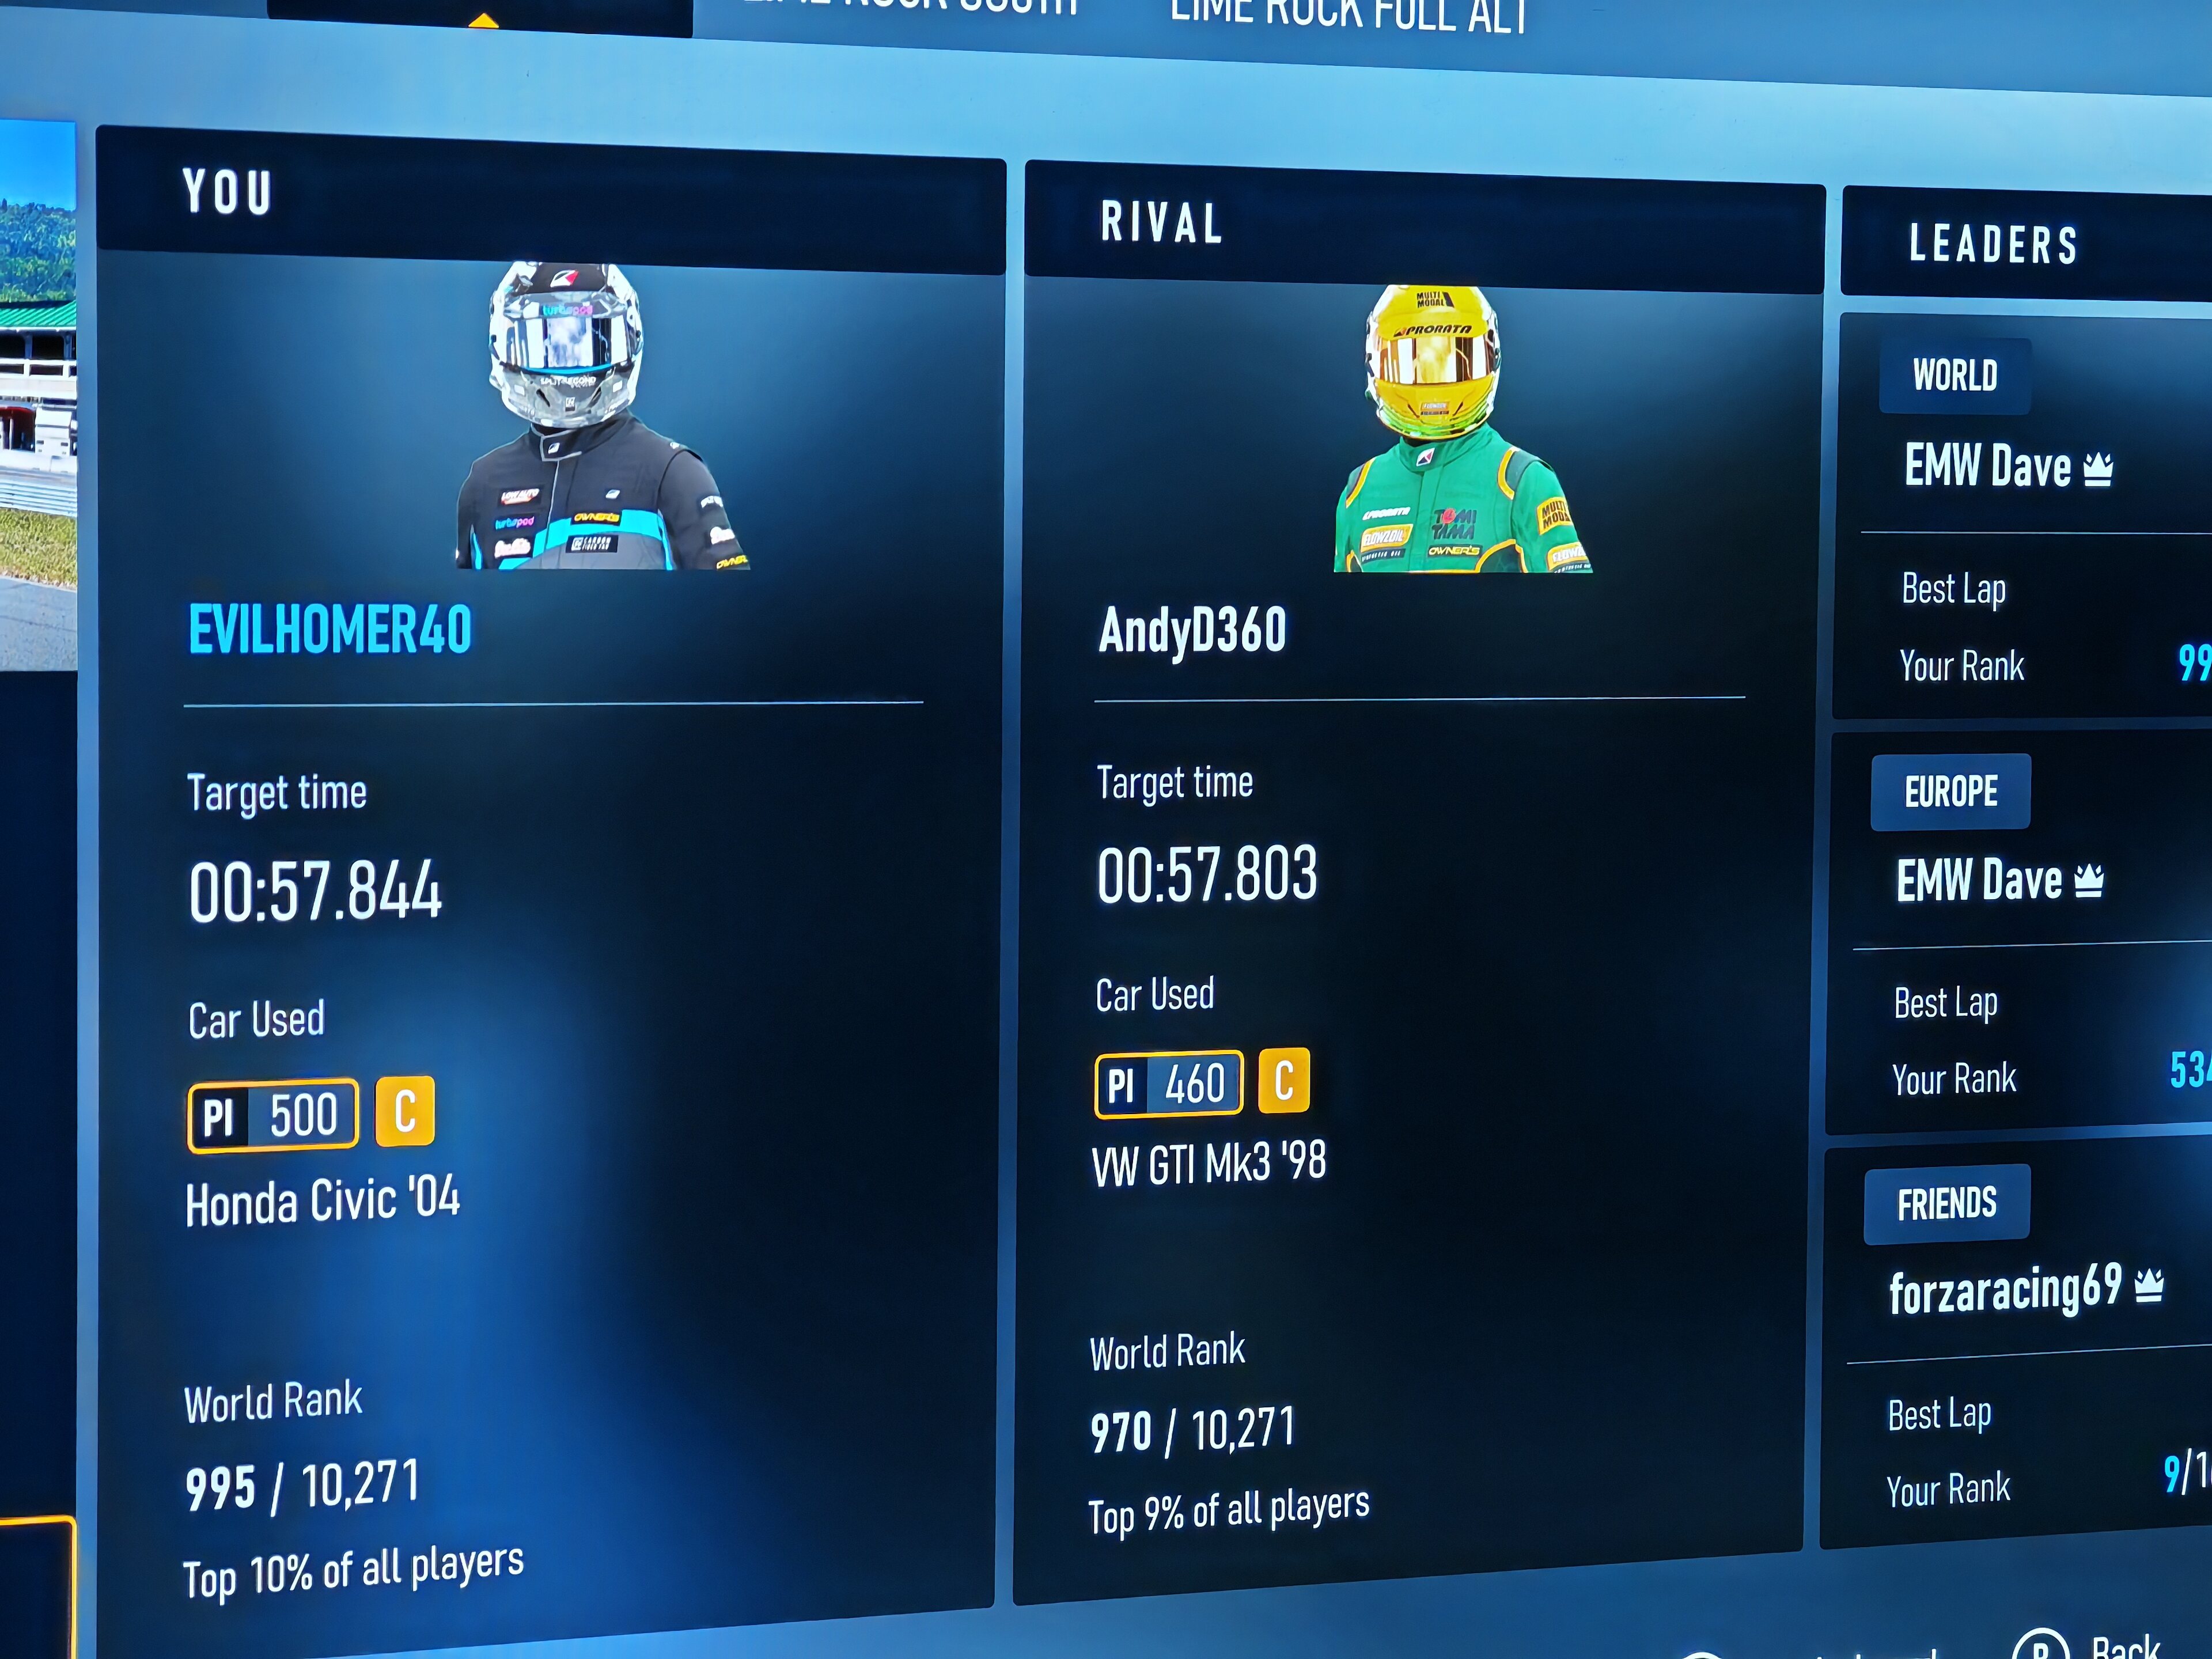 Pistonheads - The image displays a computer screen showing a video game user interface, specifically from the game "Rocket League." It appears to be a screenshot of the in-game statistics and player profiles. On the left side of the screen, there is an avatar of the player with a username above it, indicating their rank or status in the game. The right side of the screen shows three different players' stats, each representing a unique character within the game, as indicated by the names "ANDY" and "HOMEBOY." Each profile includes information such as the time played, the number of games won or lost, and other performance metrics like the percentage of successful shots. The interface is colorful and informative, typical of modern video games that provide detailed data to players about their gameplay.